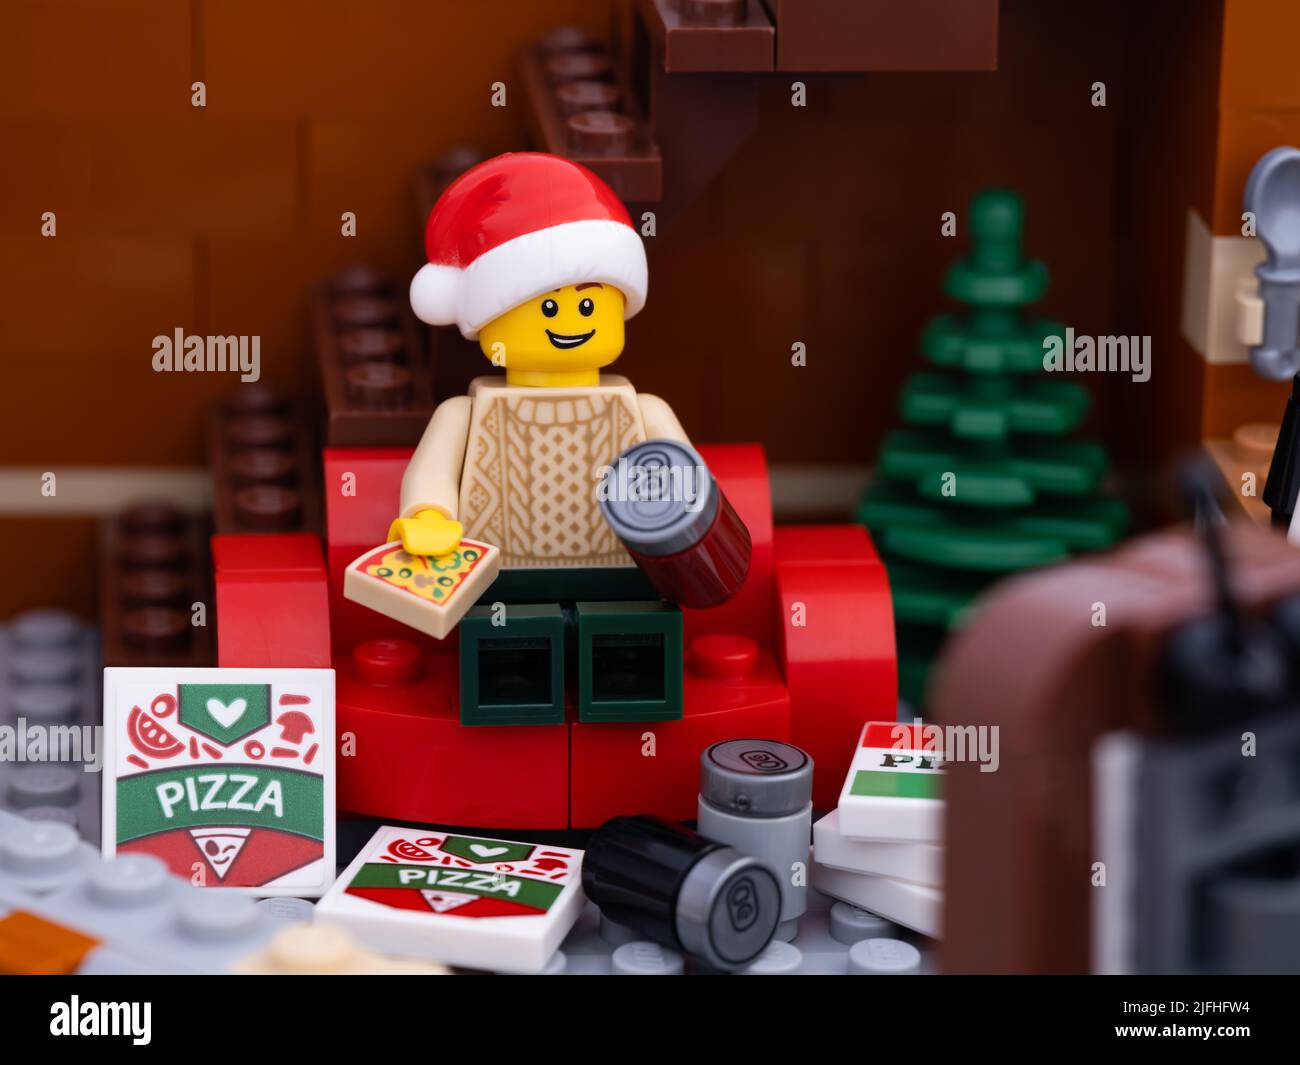 Tambov, Russian Federation - January 03, 2022 A Lego man wearing a christmas hat sitting on a red couch eating a pizza and watching television with pi Stock Photo